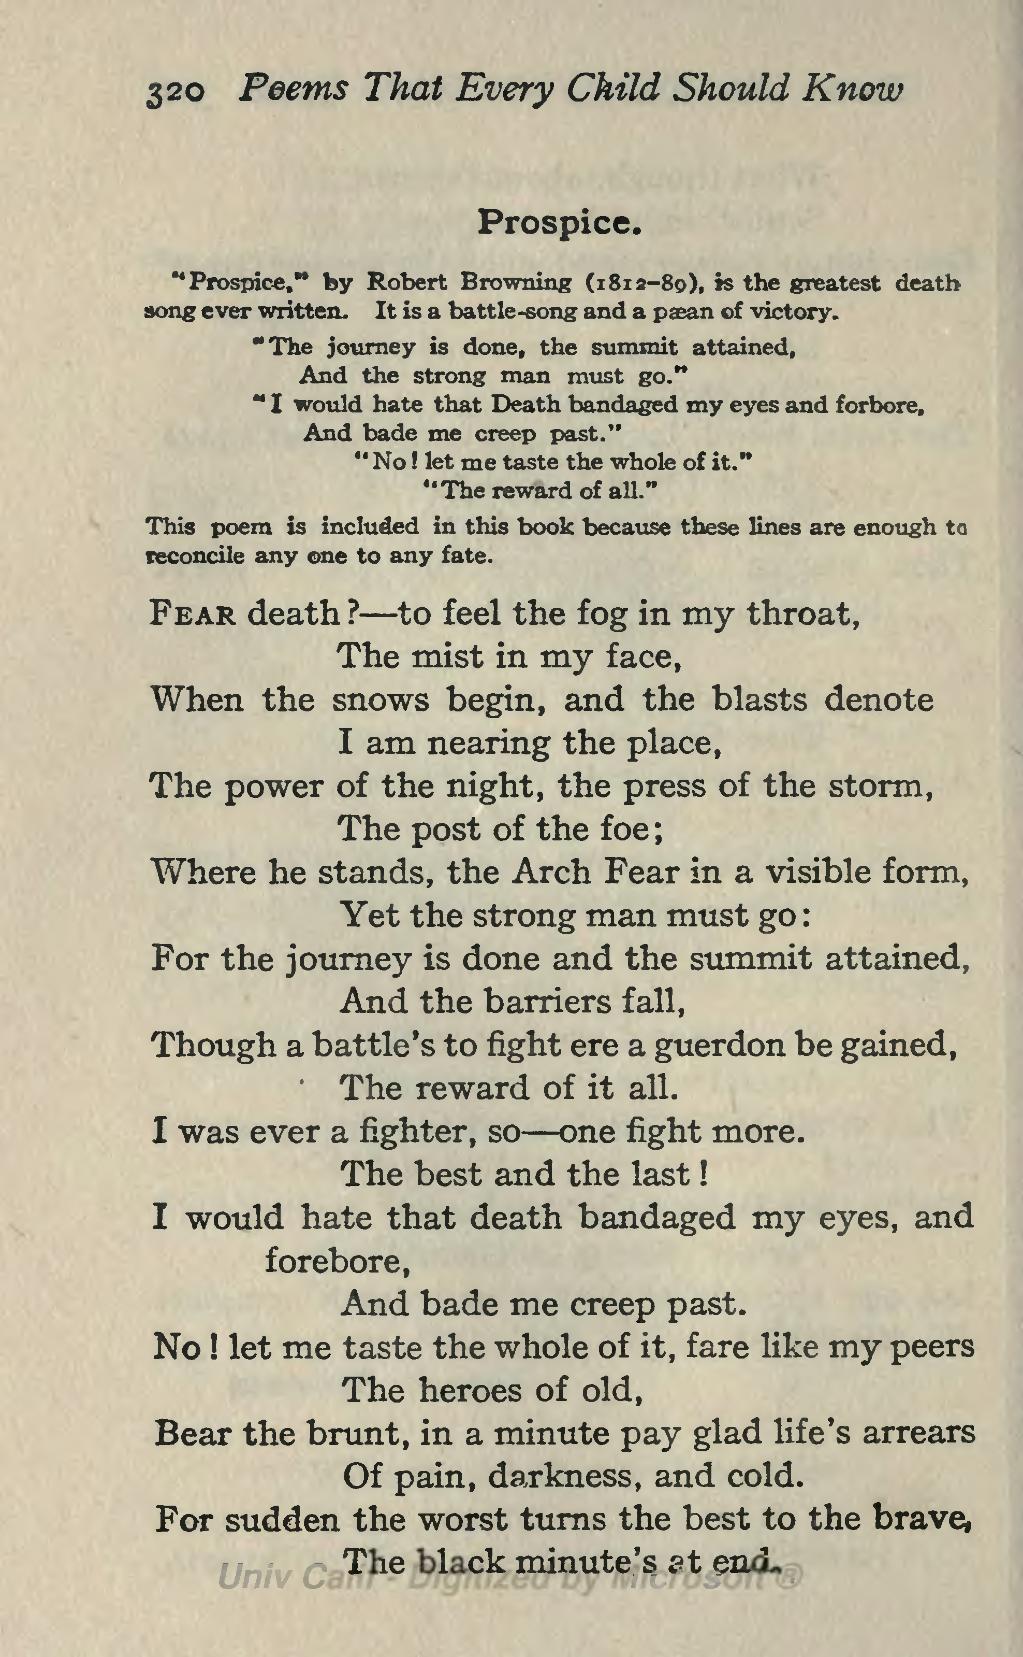 Page Poems That Every Child Should Know Ed Burt 1904 Djvu 358 Wikisource The Free Online Library For more details you can explore : ed burt 1904 djvu 358 wikisource